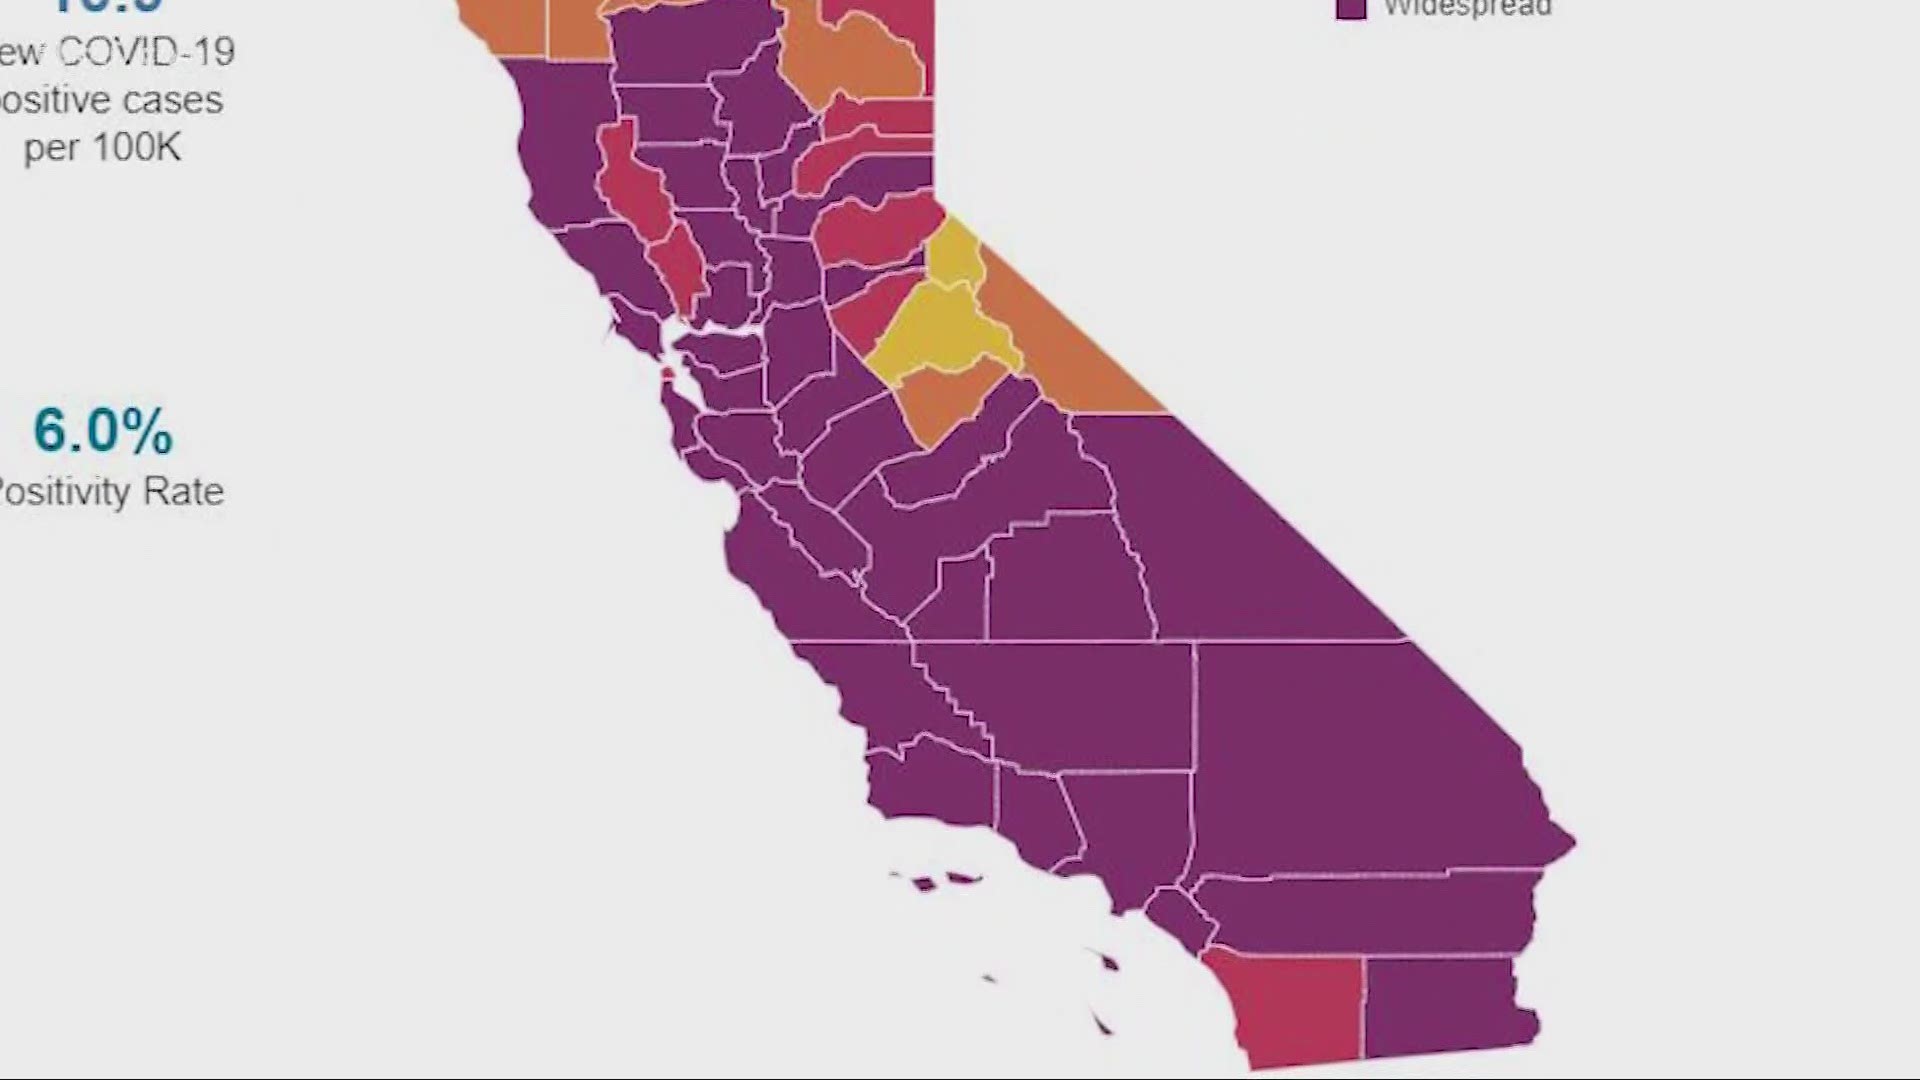 Counties will be color coded as either purple, red, orange or yellow depending on two criteria: COVID-19 daily case count per 100,000 people and positivity rate.